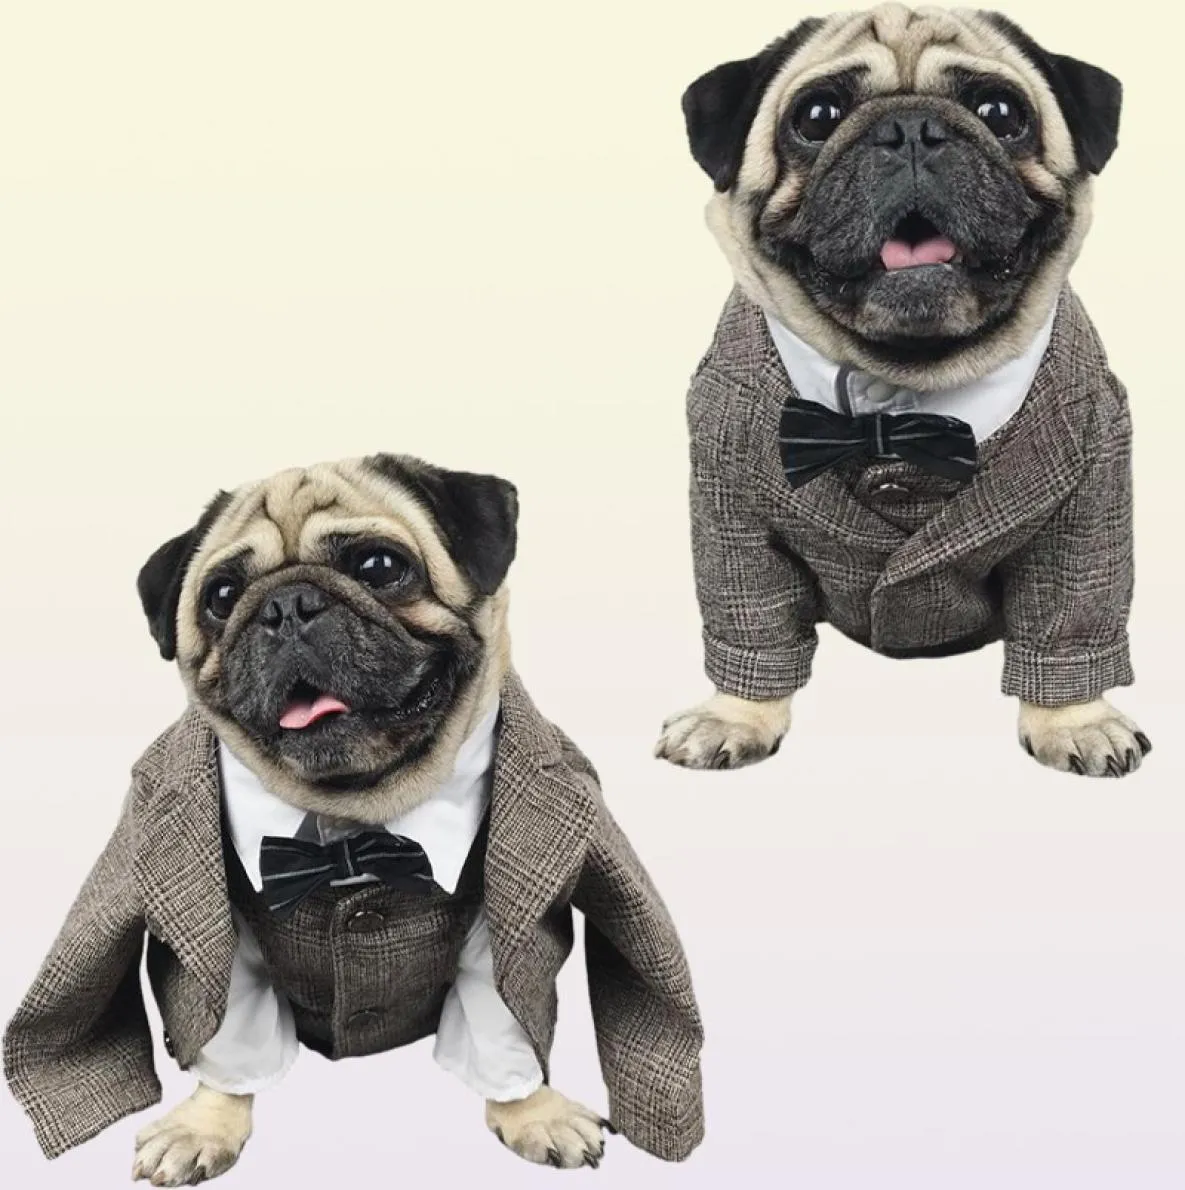 Dog Apparel Cat Clothes Wedding Party Suits For Small Dogs Pet Tuxedo Coat Costume XS S M L XL 2XL8242879